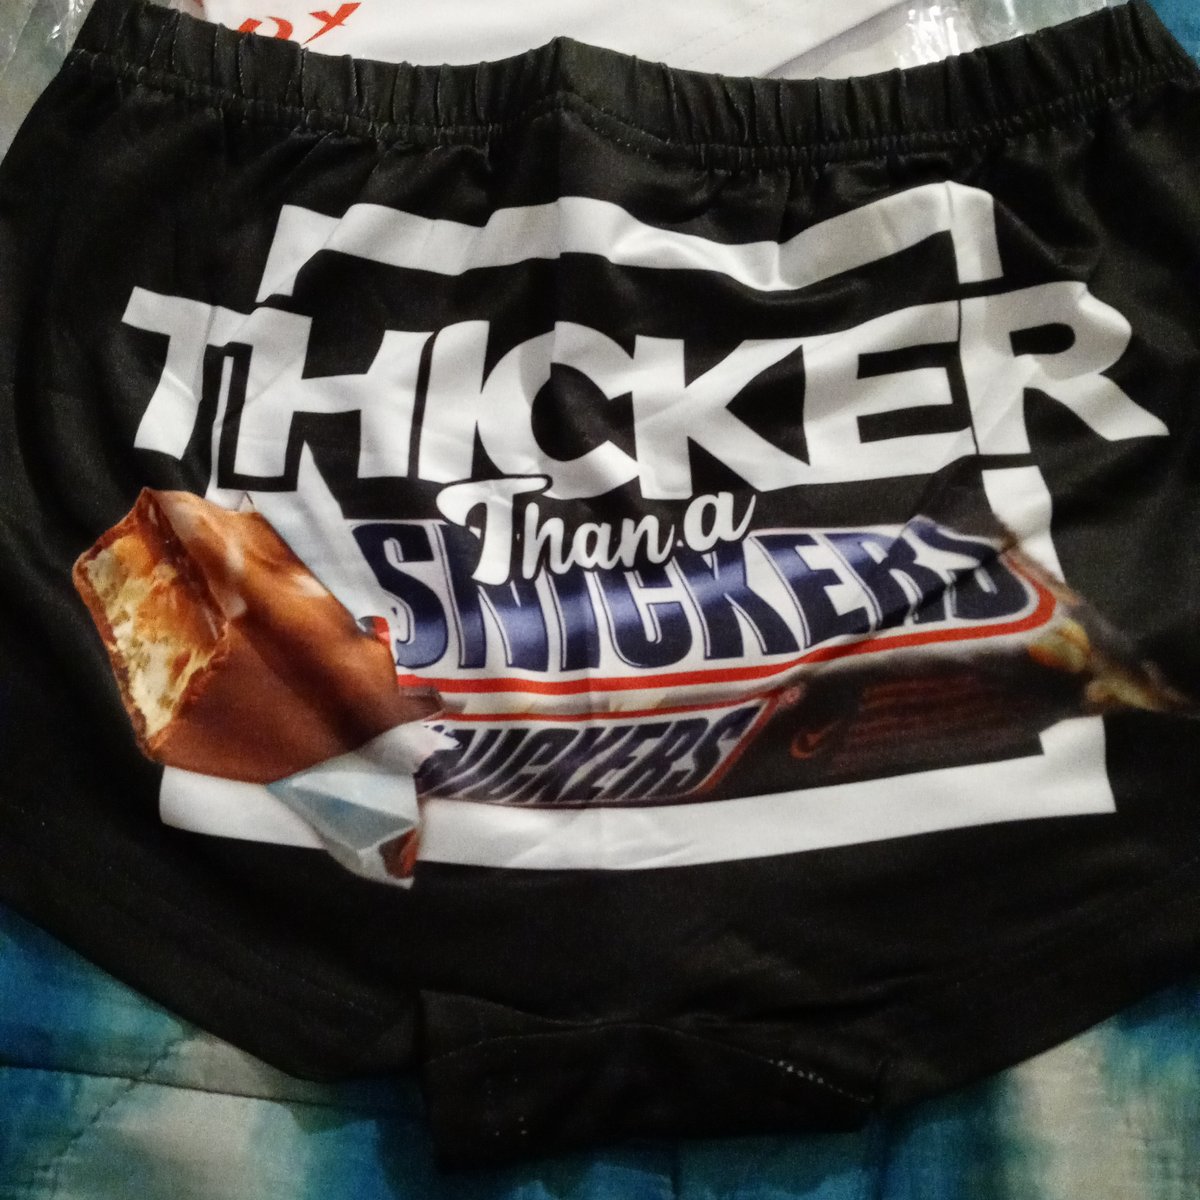 Thicker Than a Snickers.